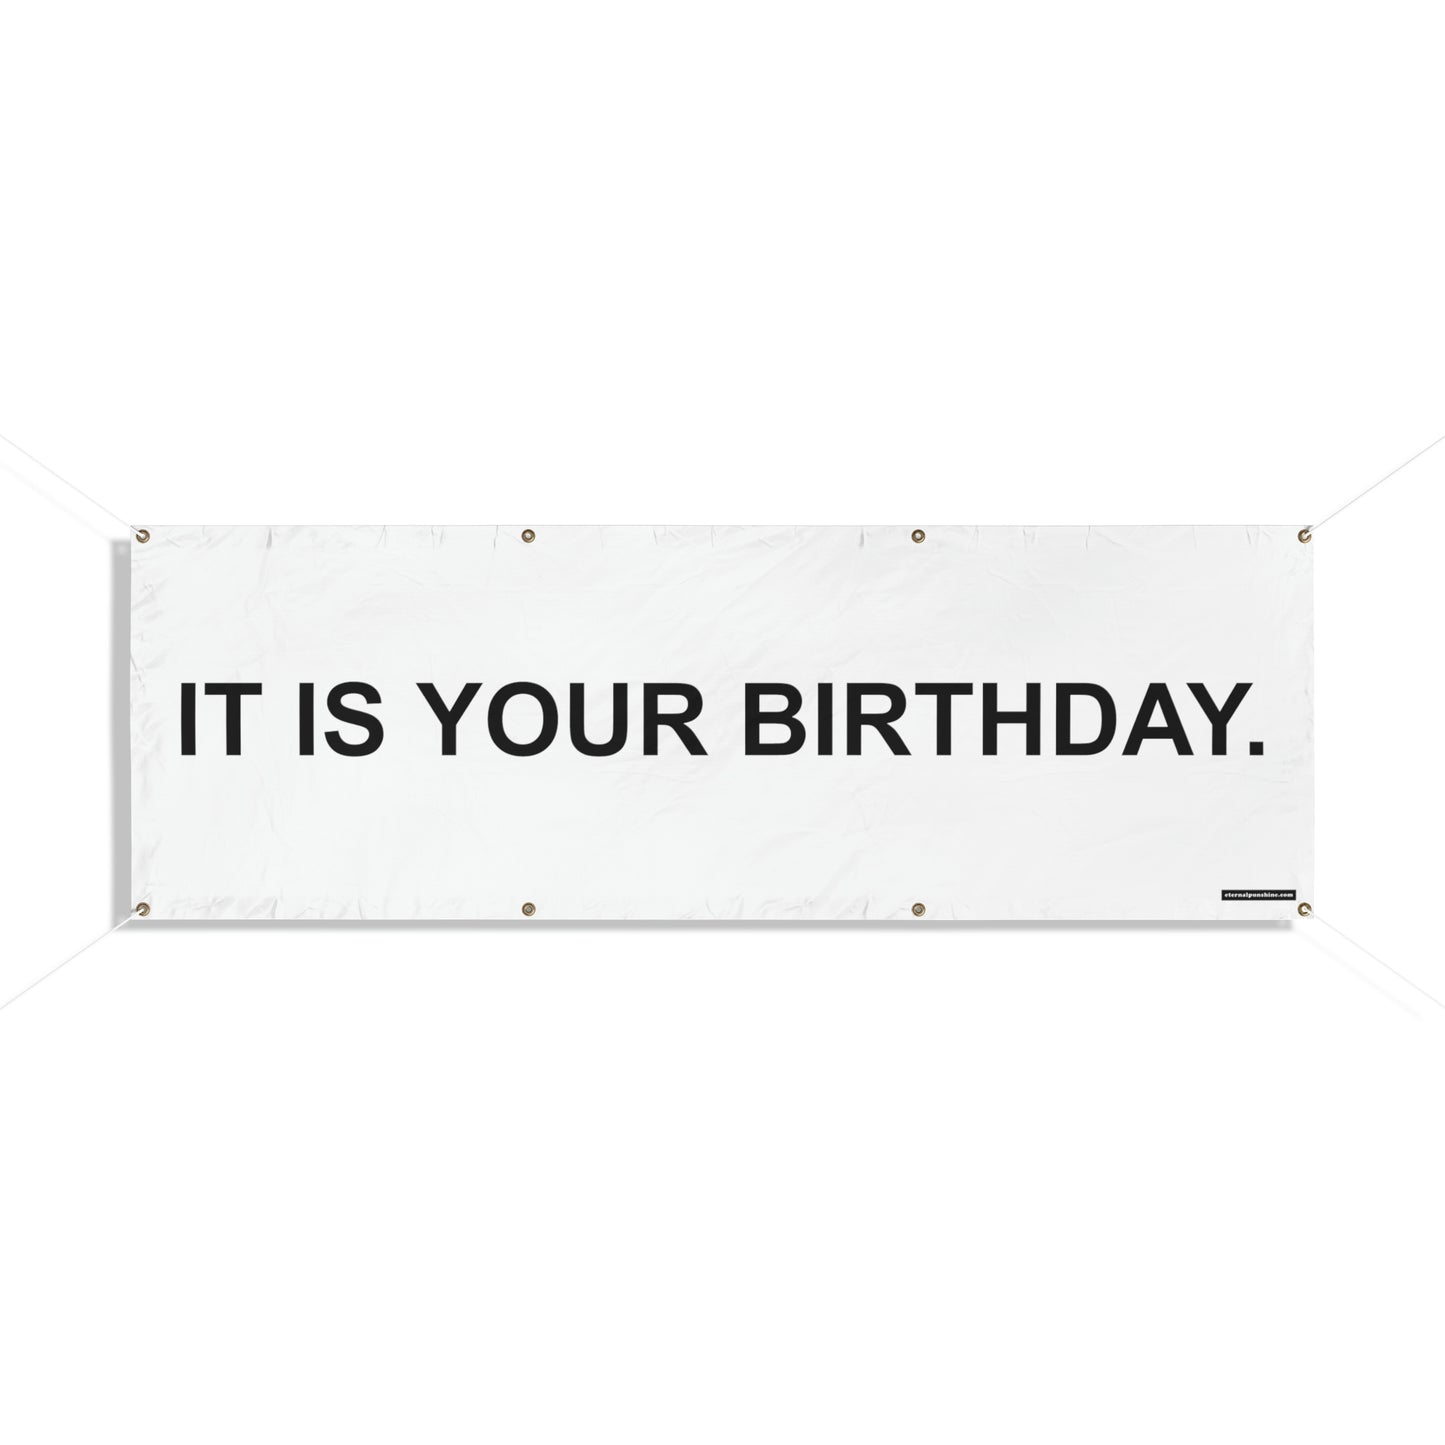 It is your birthday.